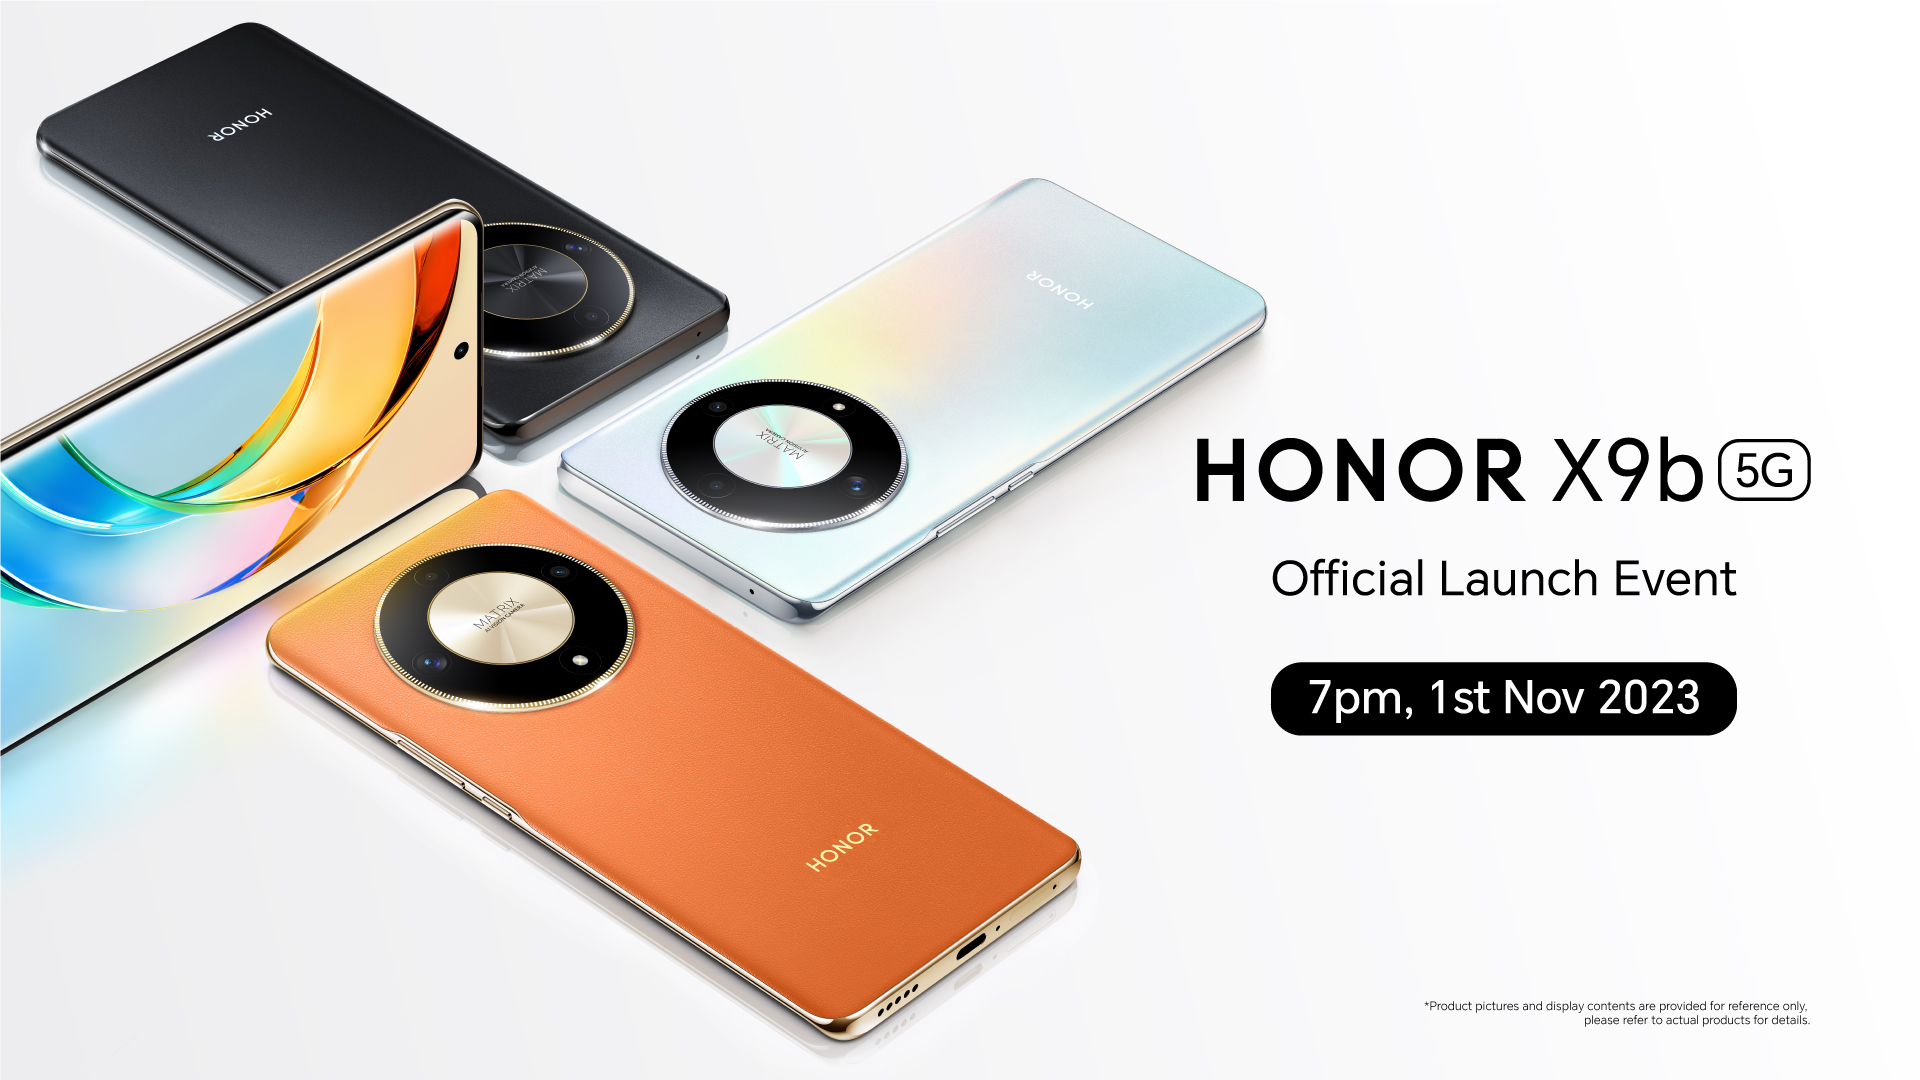 The Honor X9b 5g Early Bird Promo Is Here You Can Reserve The New Phone With A Deposit Of Rm9